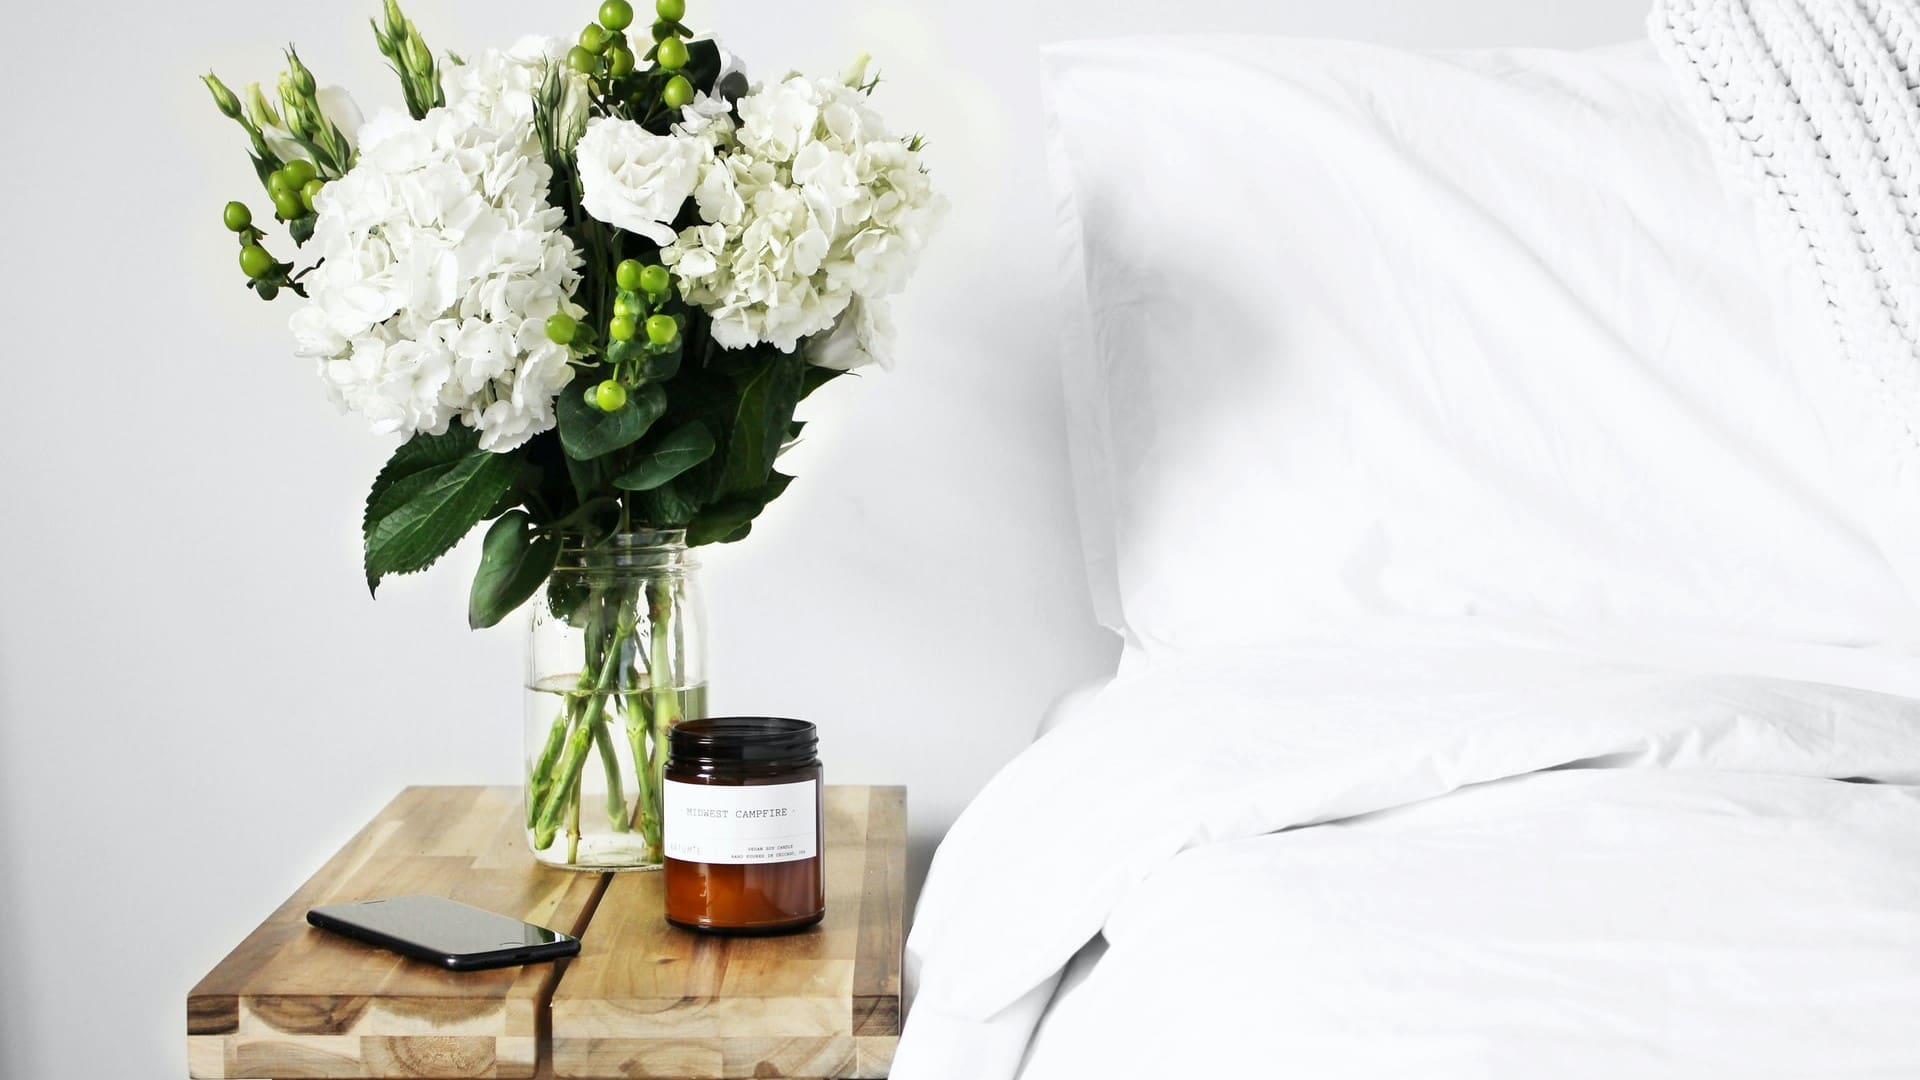 Natural wood nightstand with fresh flowers, candle, and phone next to bed.